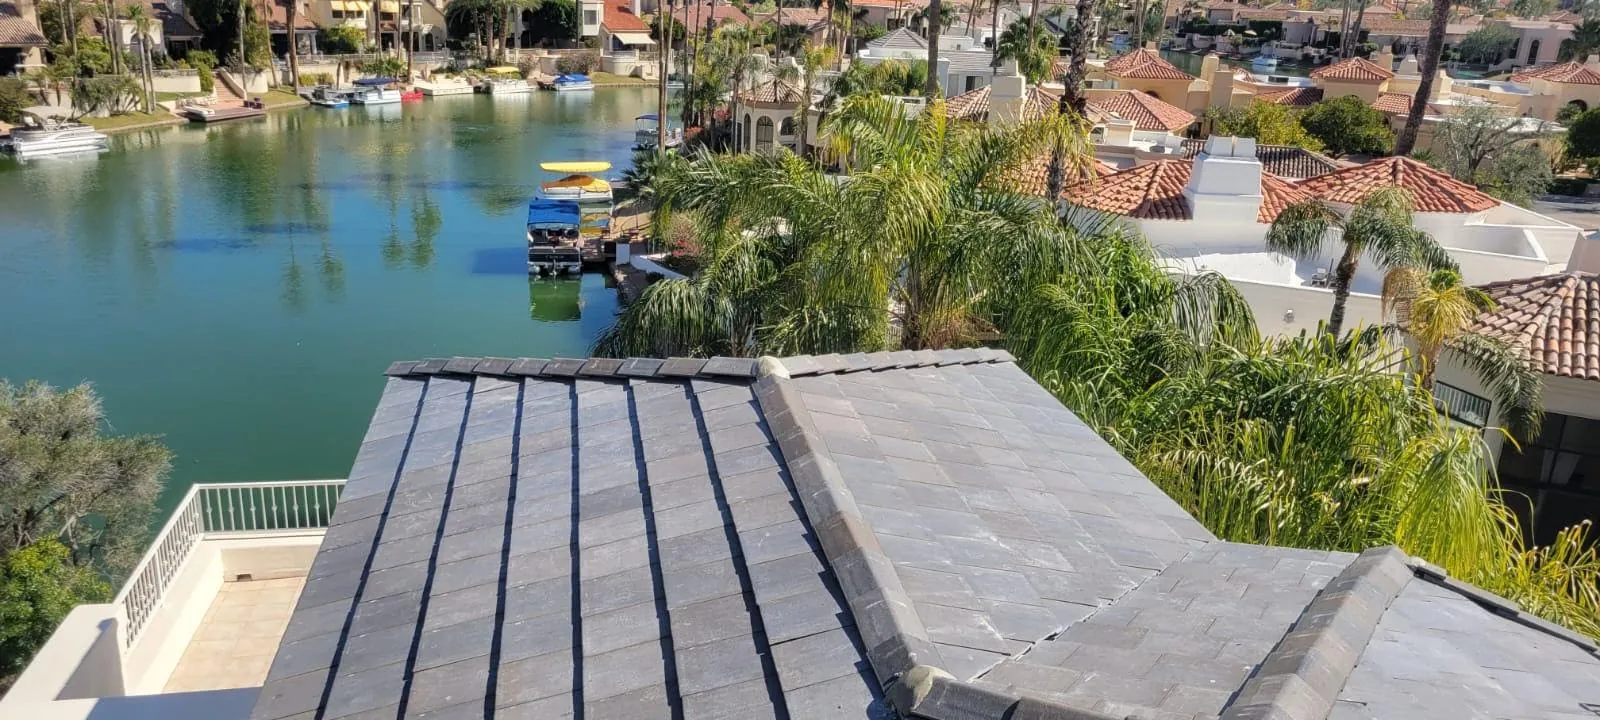 tile roof replacement done by company chandler az